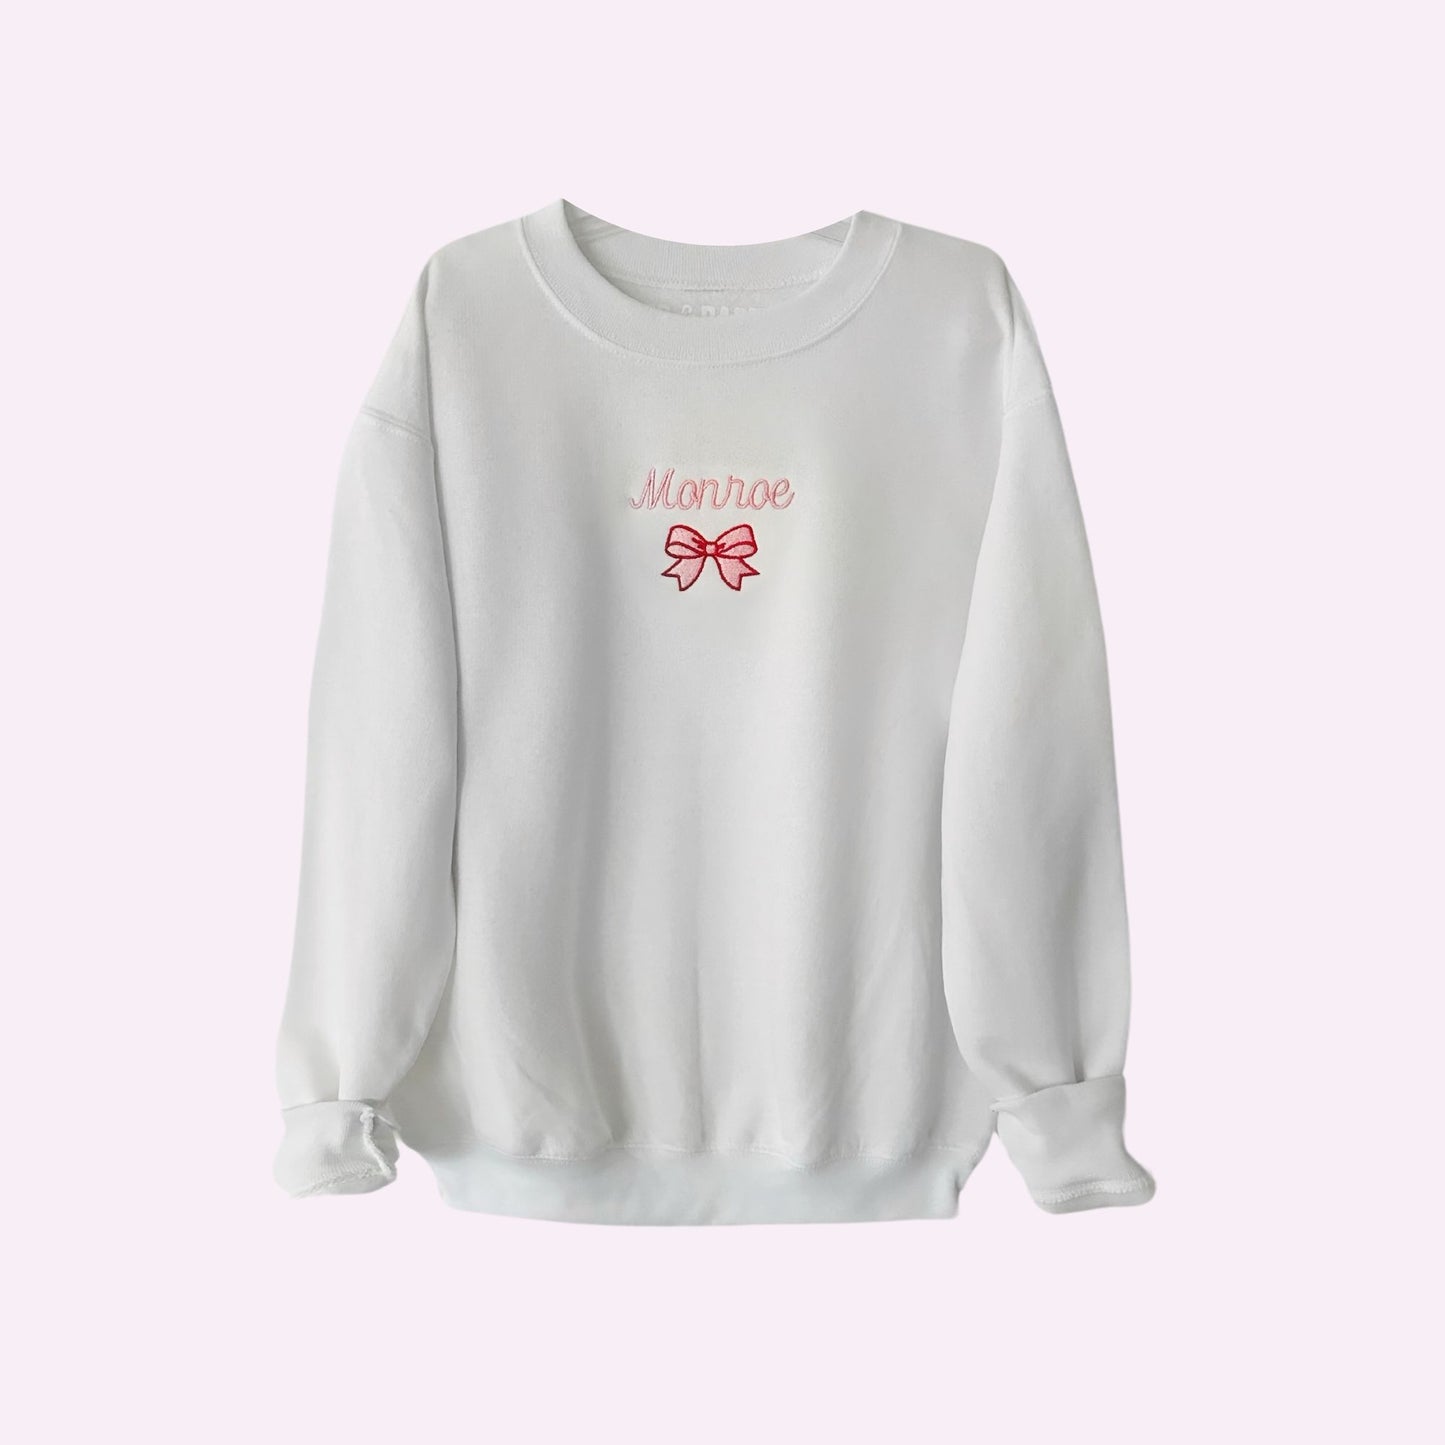 BOW STITCH ♡ kids custom embroidered sweatshirt with bow